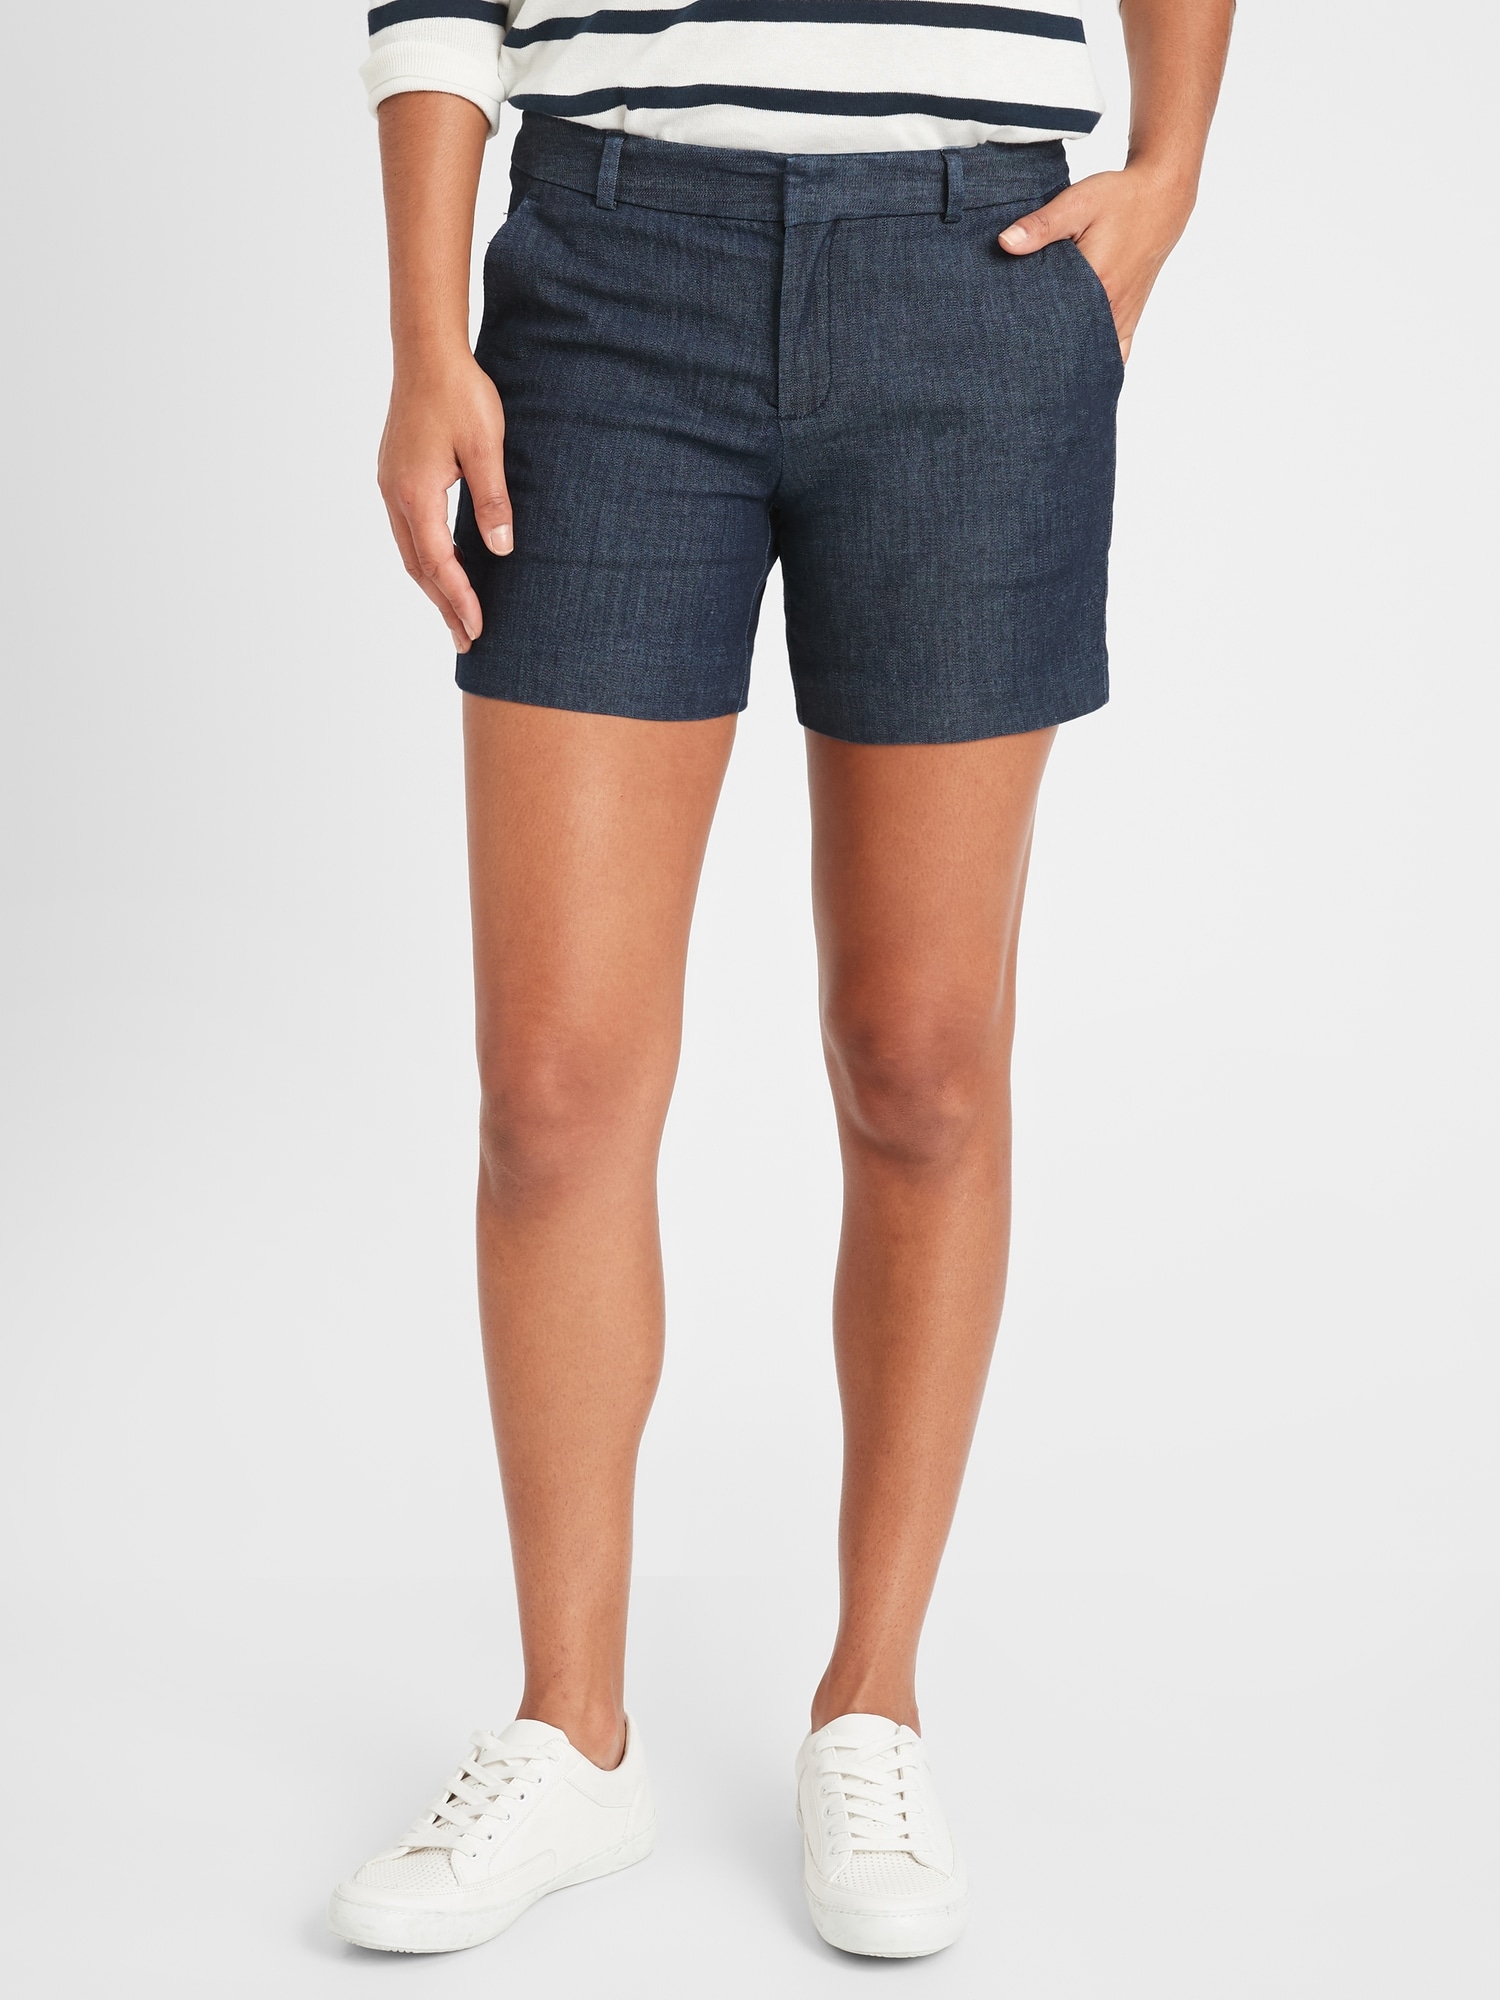 Petite Tailored Chambray Pique Shorts - 5 inch inseam